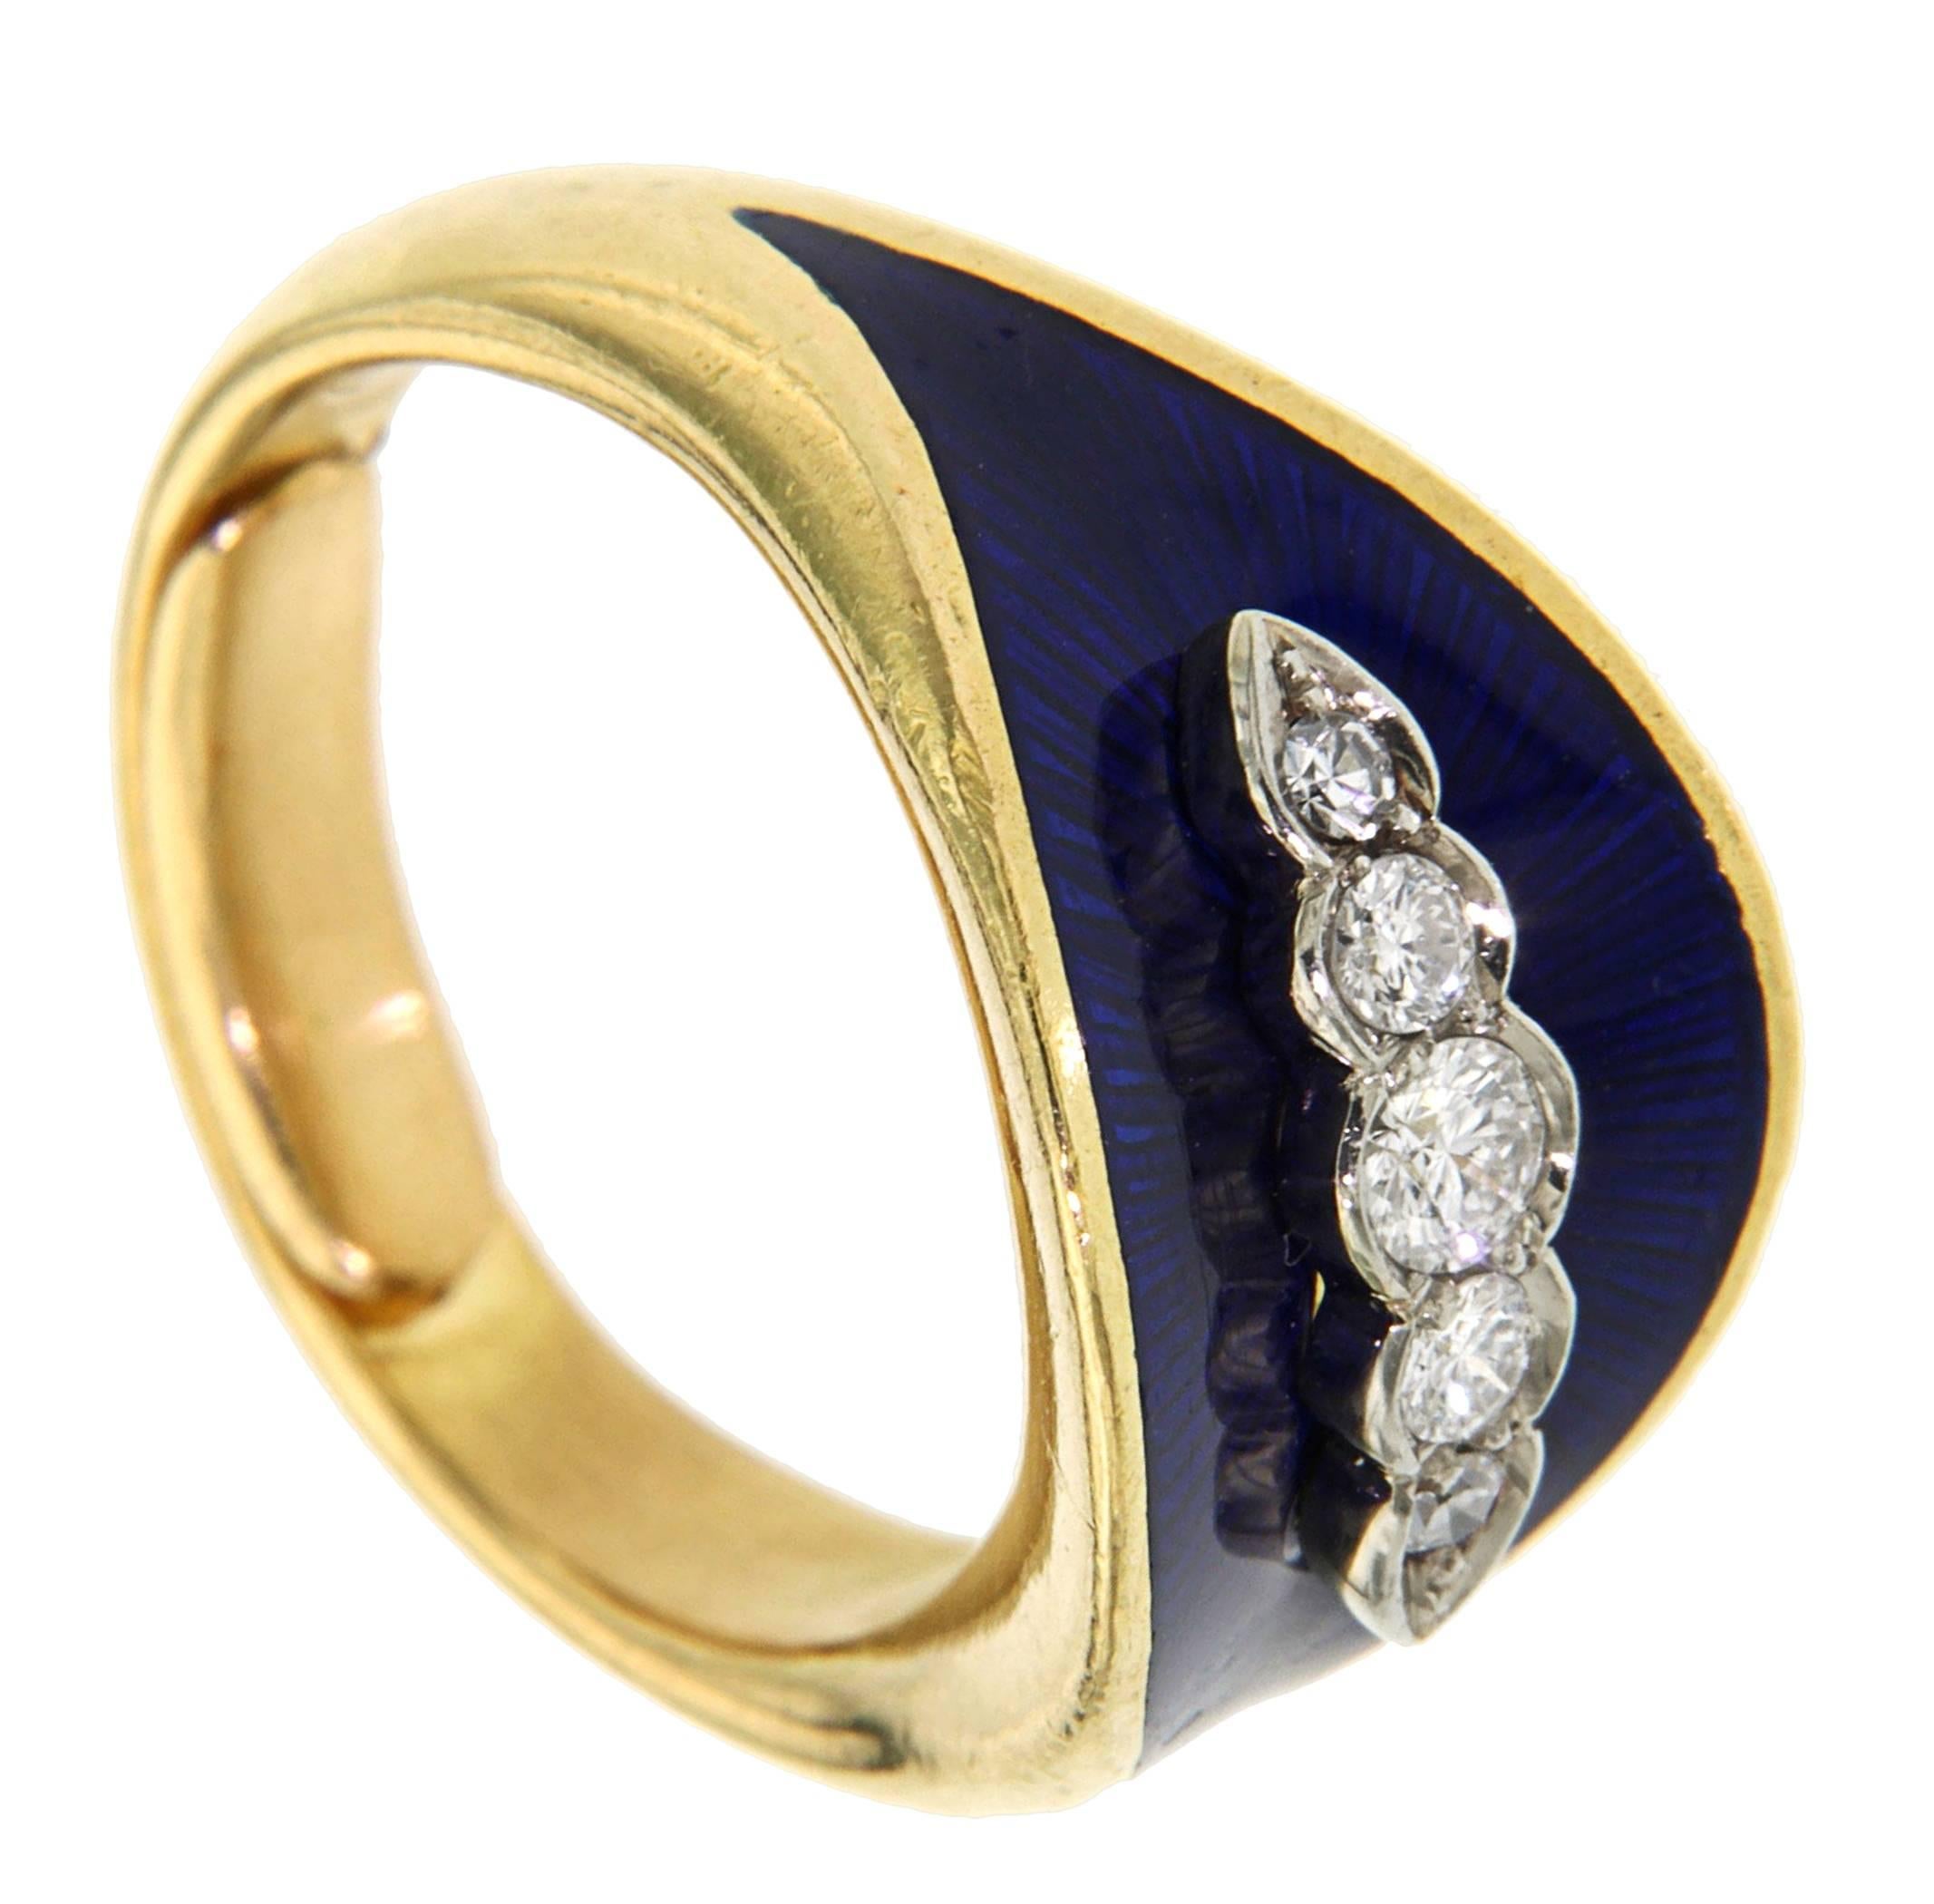 Antique 18k yellow gold blue enamel ring with five diamonds 0.25 ctw. circa.
For little finger, size 4 1/2
Ready for delivery. It can be shipped with express delivery on